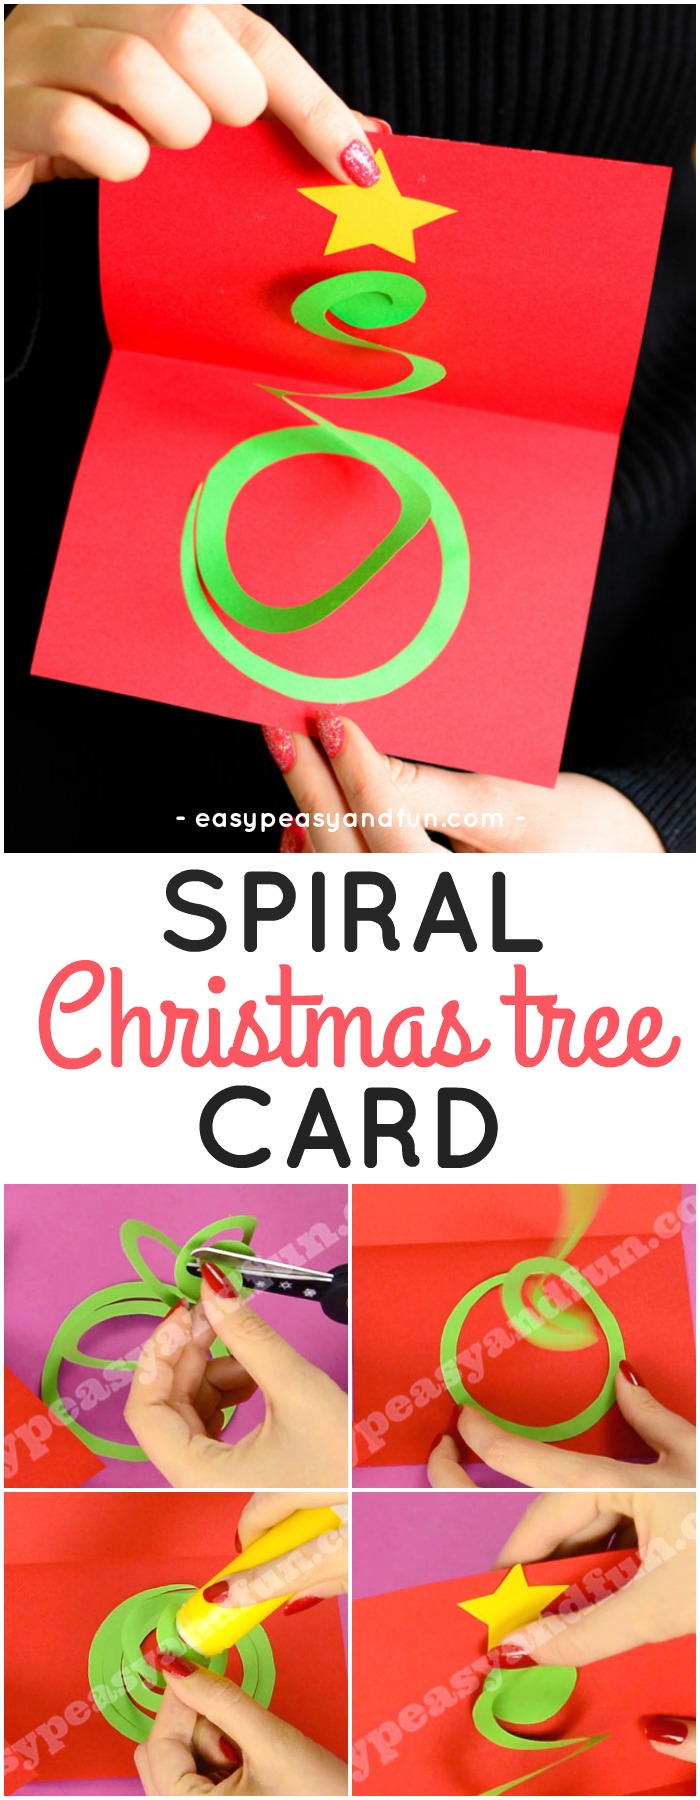 Spiral Christmas tree card idea. Children can make interesting Christmas paper crafts.  #Christmascraftsforkids #papercraftsforkids #DIYChristmascard